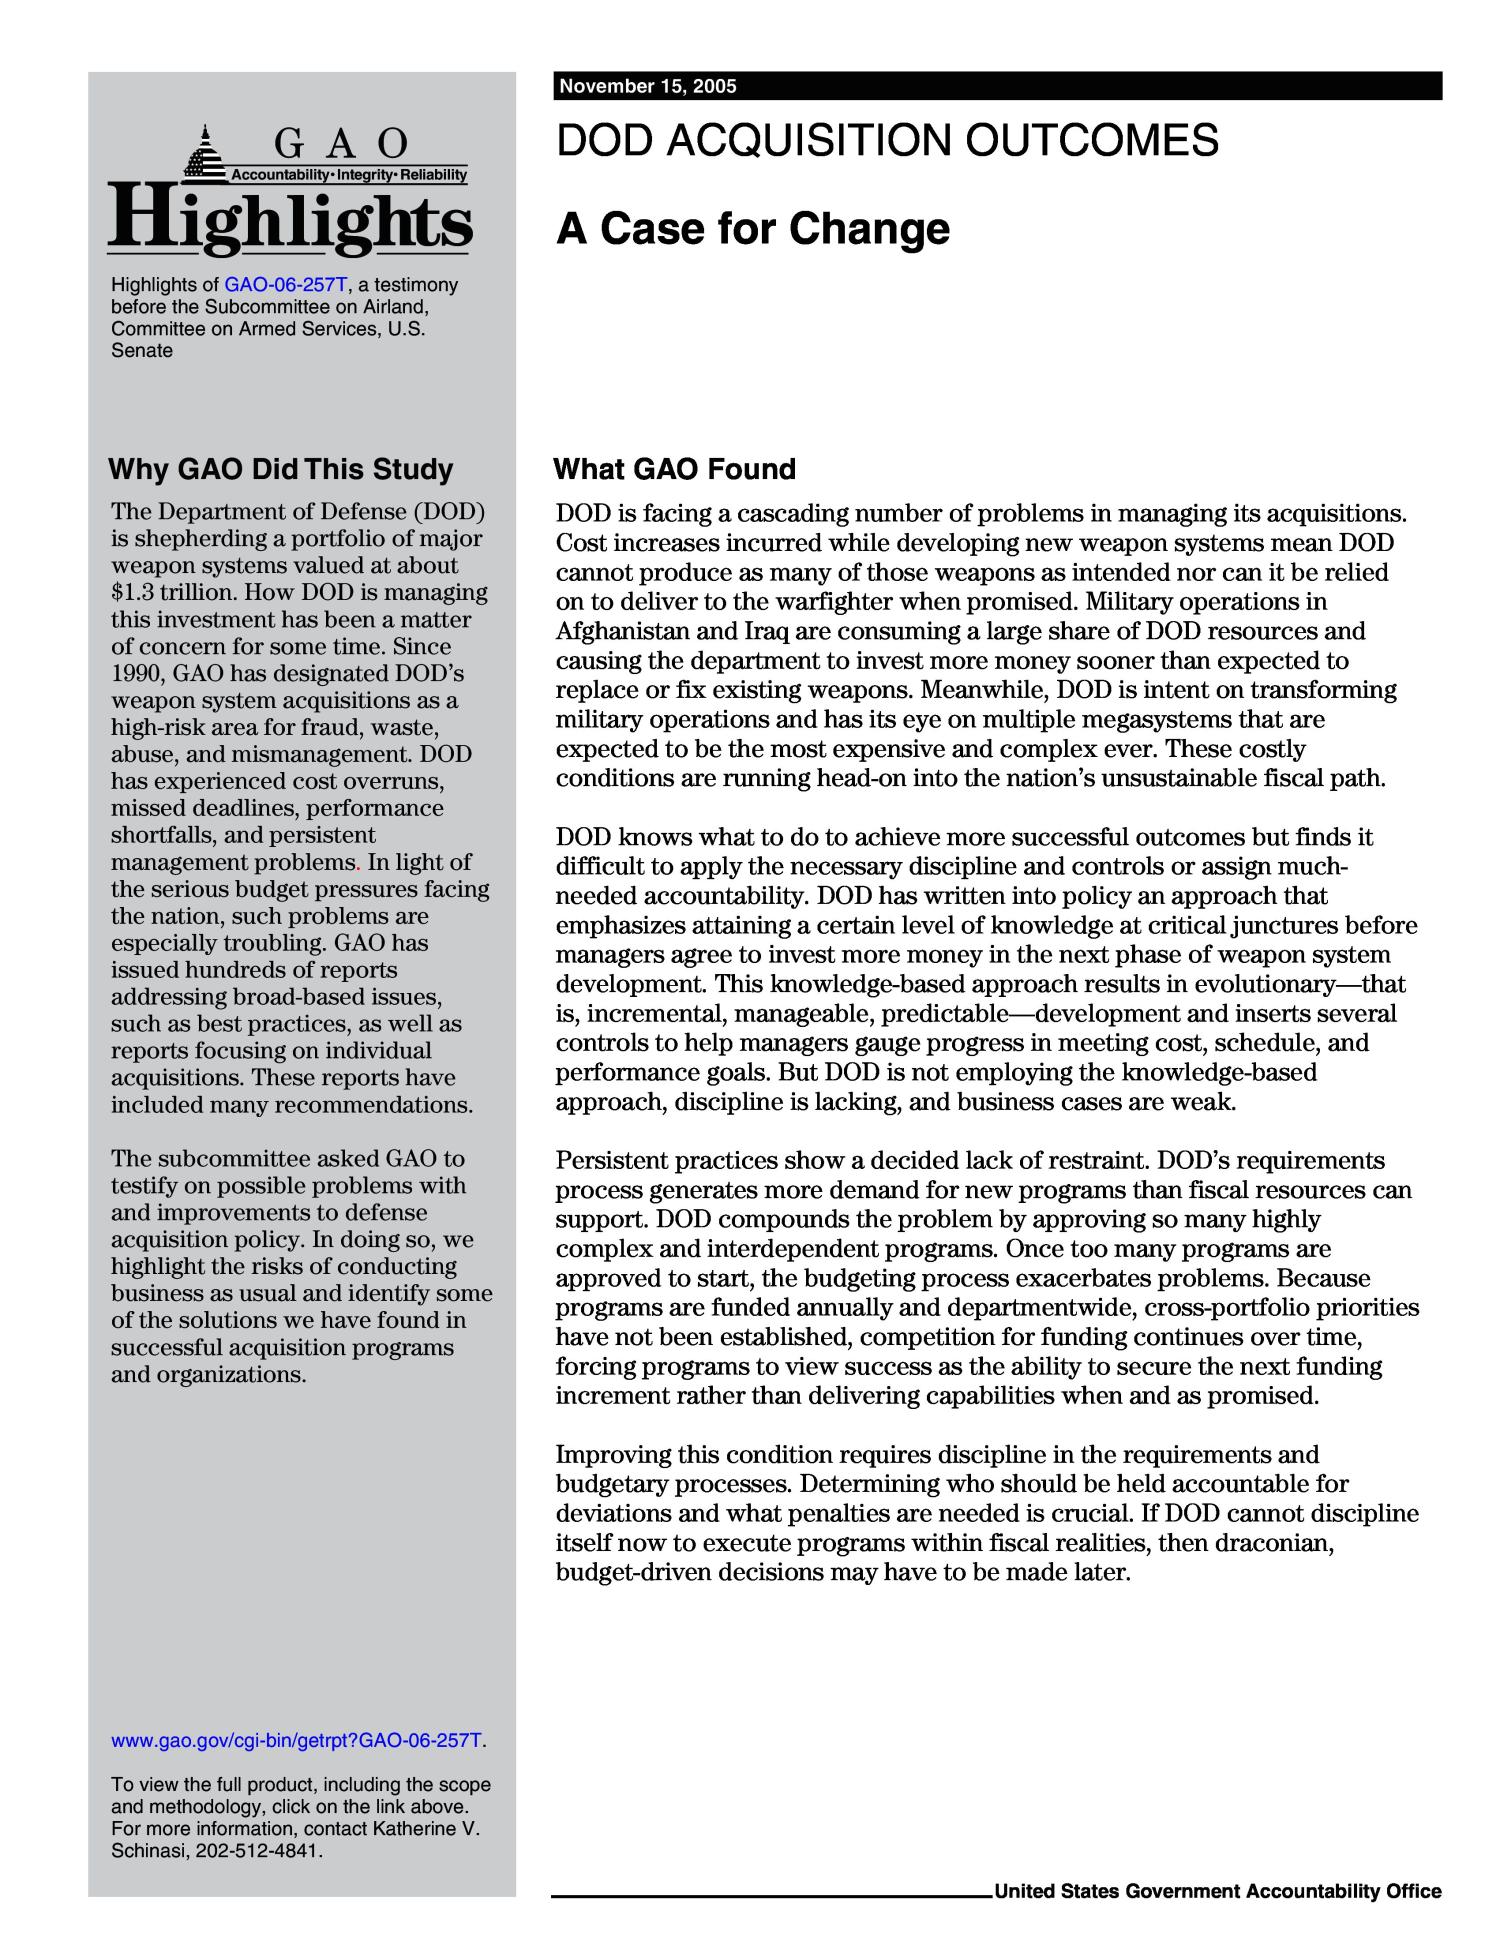 DOD Acquisition Outcomes: A Case for Change
                                                
                                                    [Sequence #]: 2 of 15
                                                